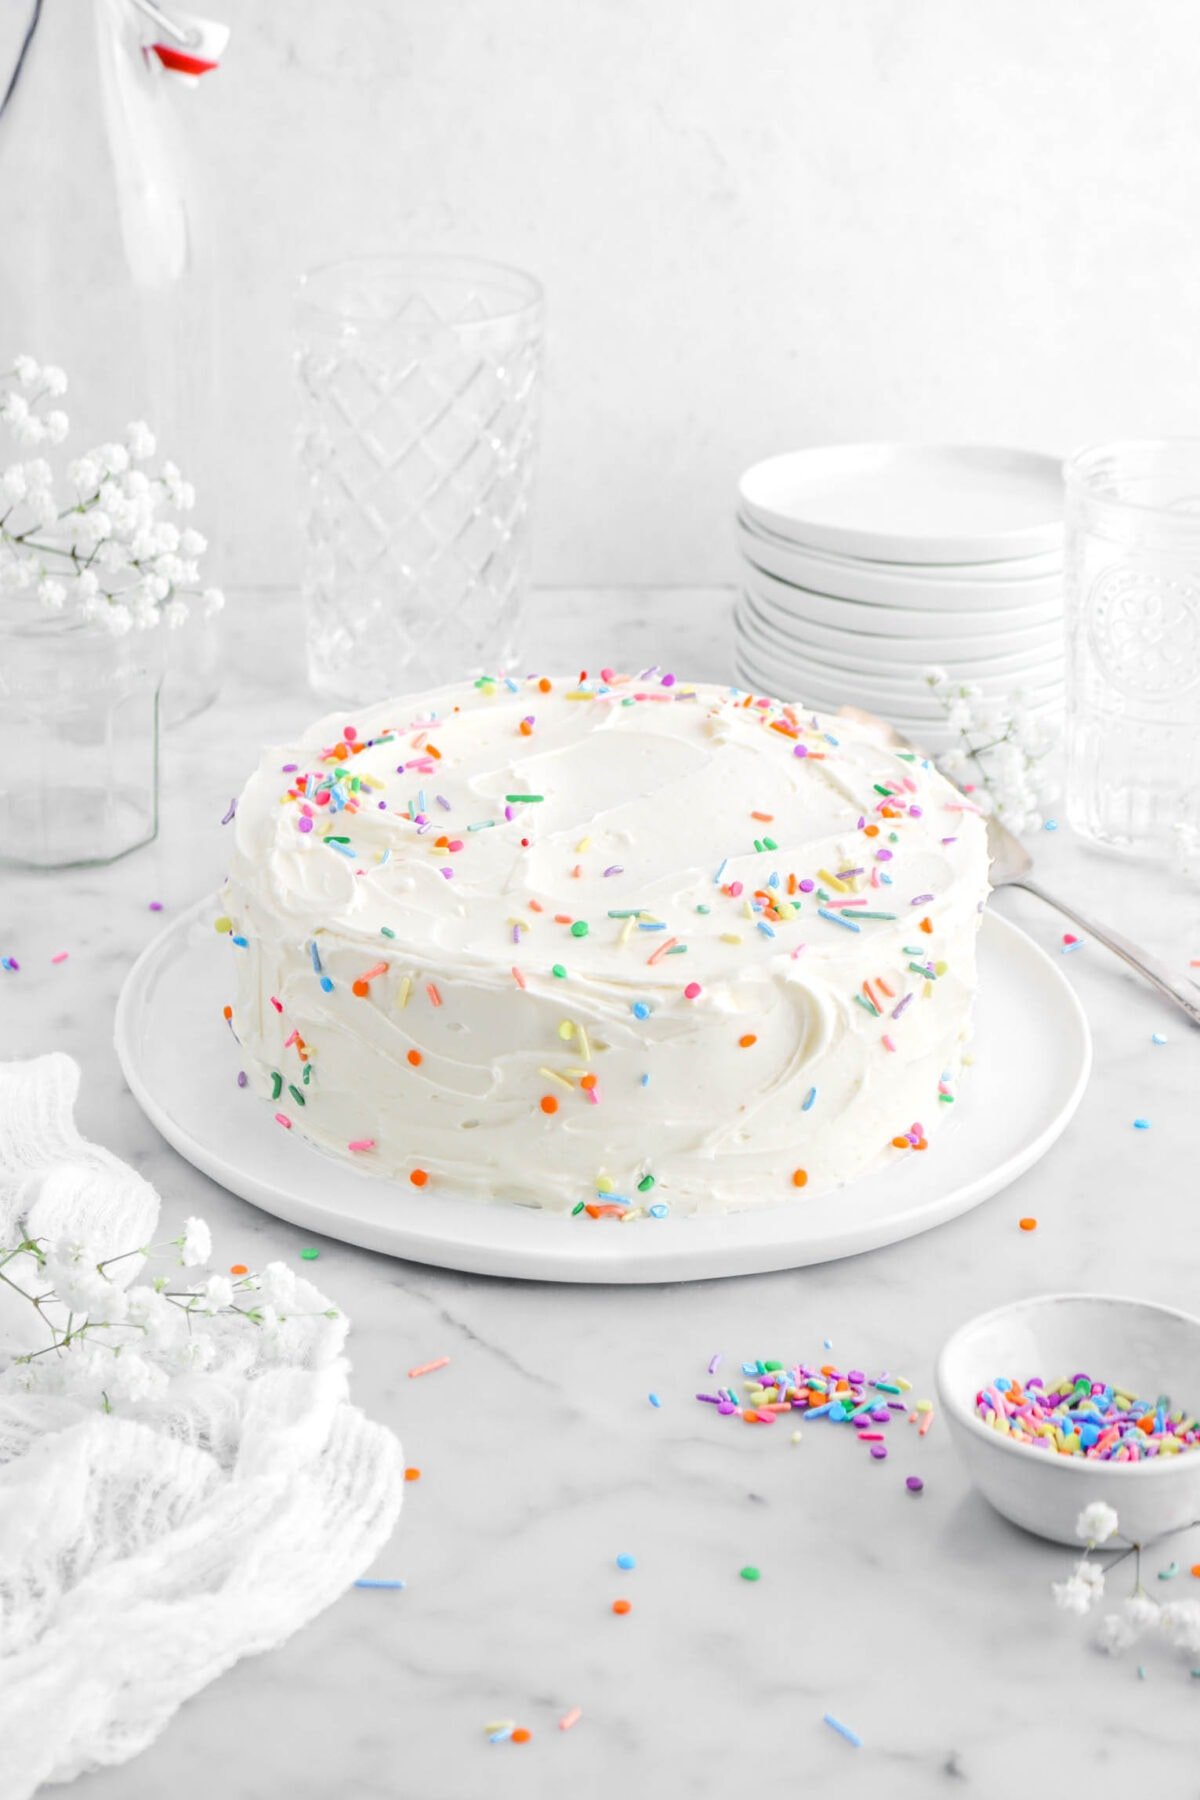 front shot of frosted cake with sprinkles scattered around on marble surface, with white cheesecloth beside, white flowers, empty glasses, and stack of plates behind on marble surface.